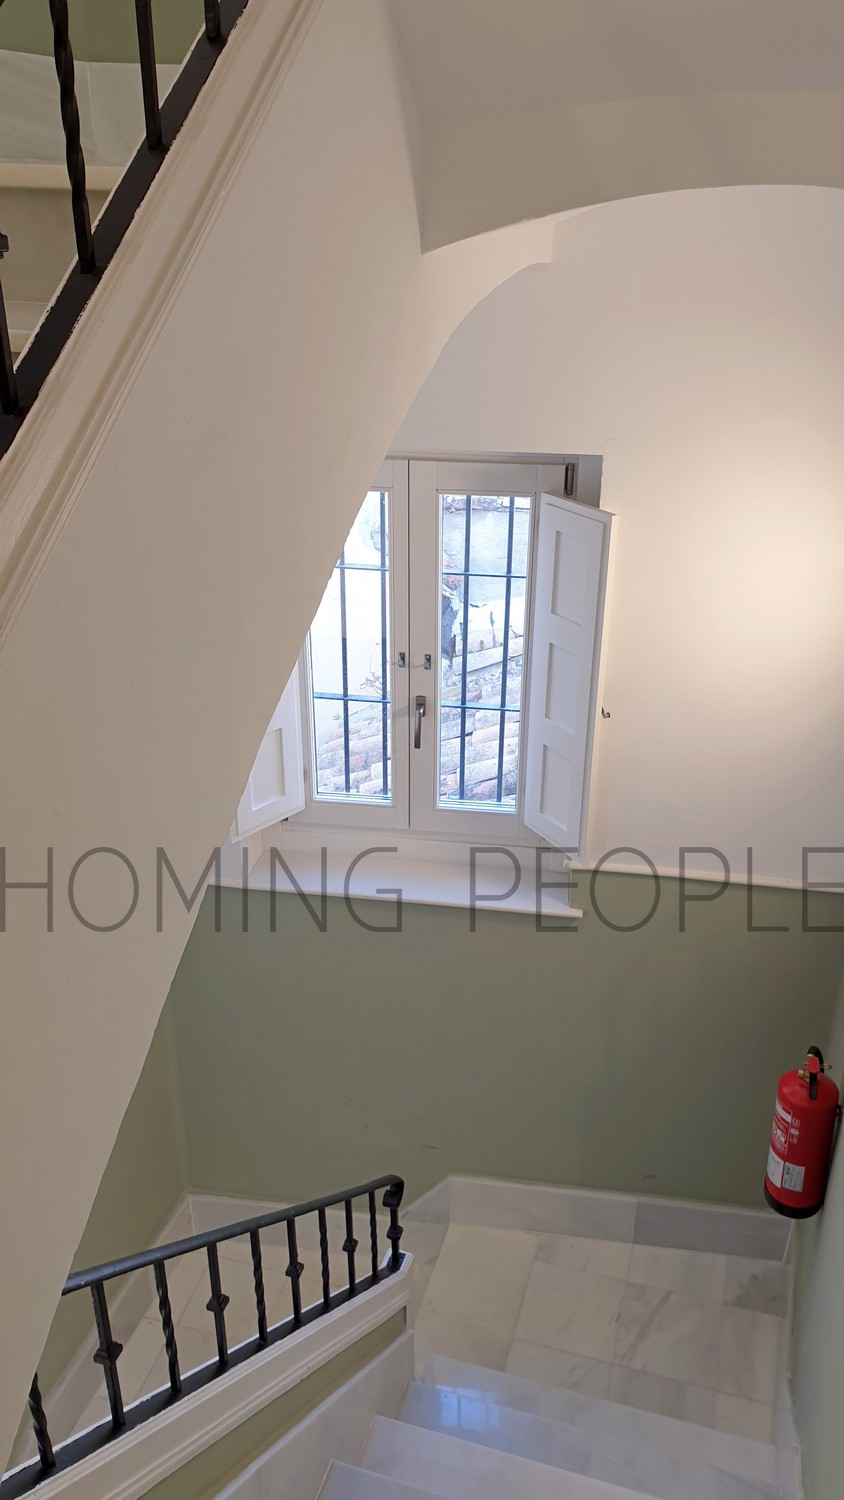 Brand new, top-design flat: Lots of light in a charming building in the city centre !